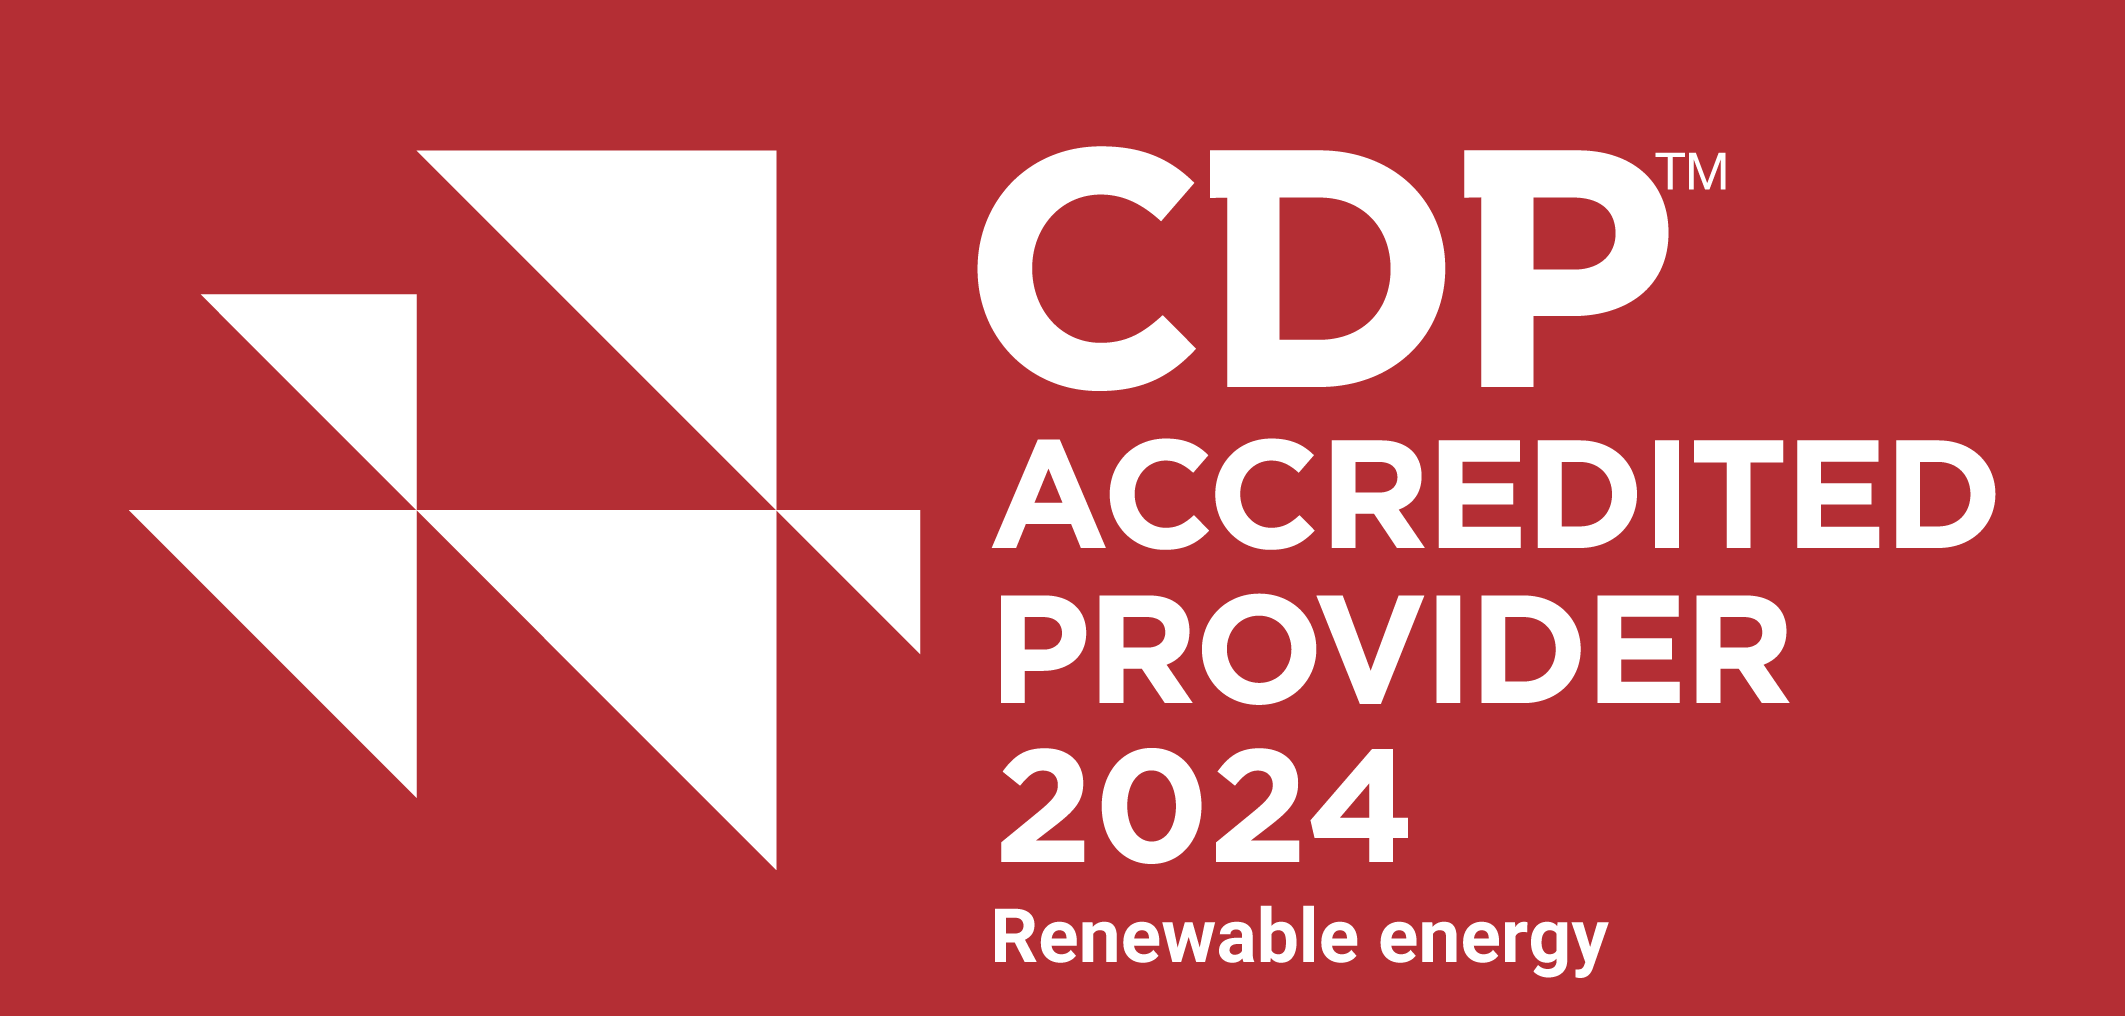 CDP Accredited Provider 2024 Renewable Energy